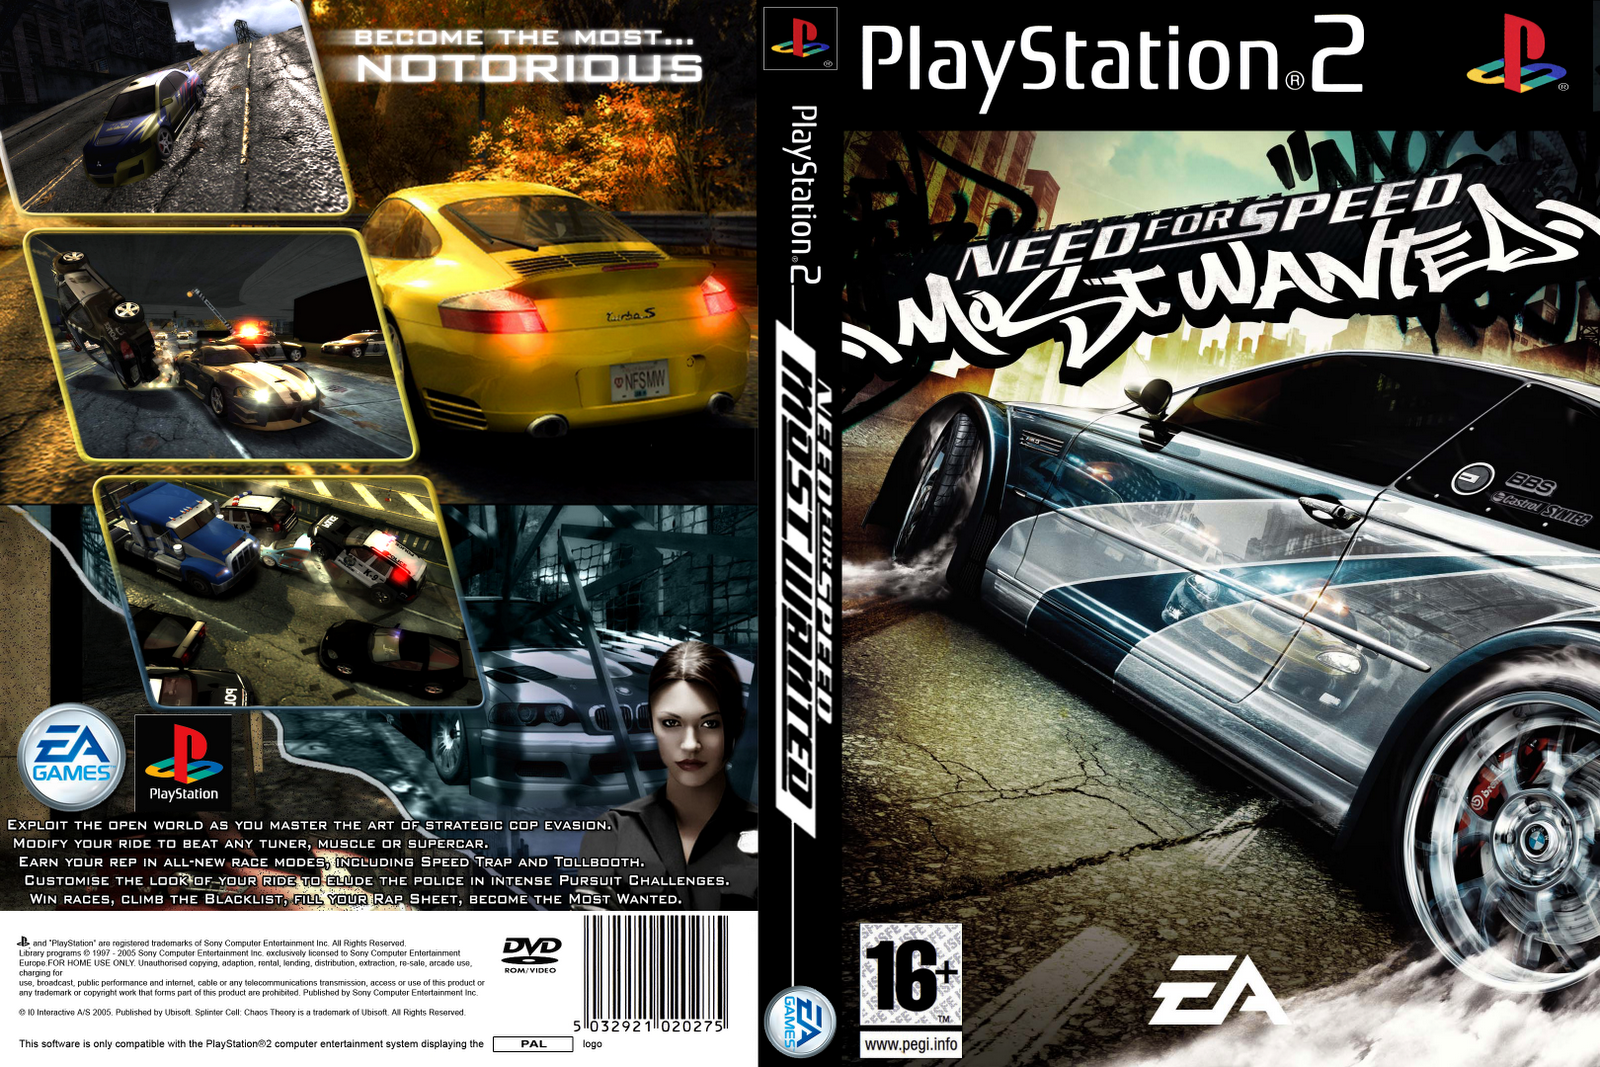 Need for speed wanted game. Диск для PLAYSTATION 2 need for Speed. Need for Speed most wanted ps2 диск. Need for Speed на ПС 2 диски. Игра NFS most wanted 2005.